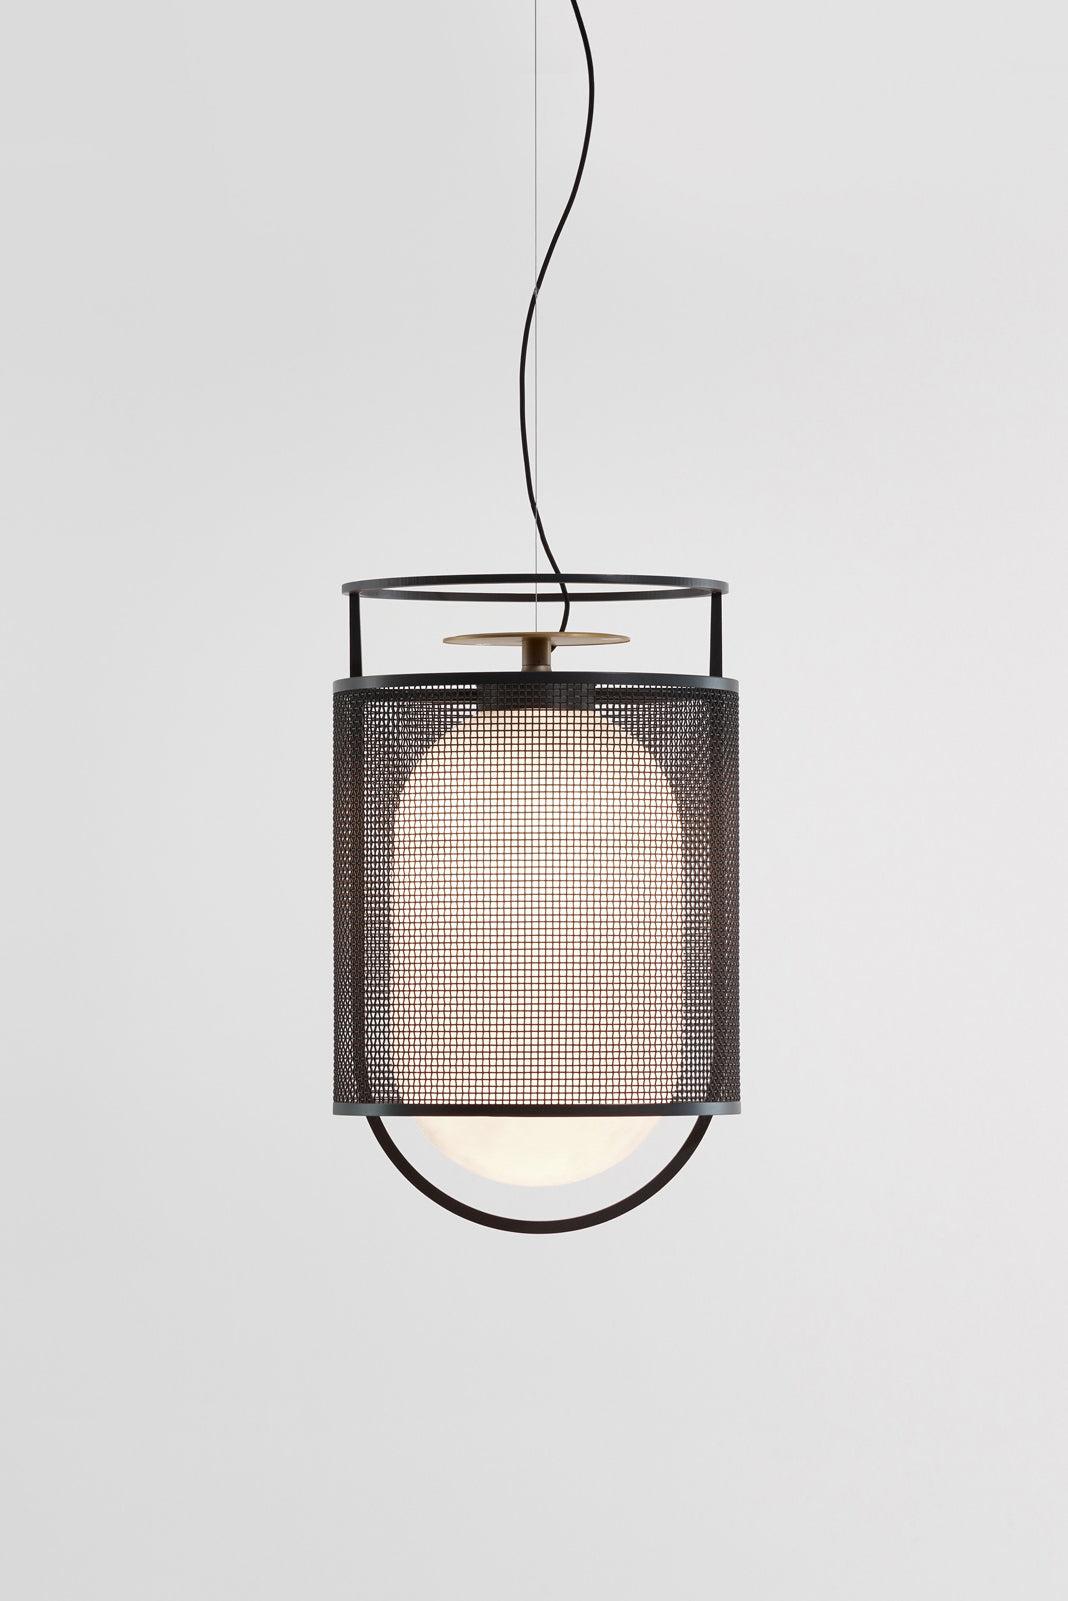 DENGLONG T PE

Outdoor Suspension lamp. Anthracite lacquered aluminium structure and steel mesh. Top disc in gold lacquered aluminium.Fiberglass diffuser. Led module included and dimmable with phase-cut dimmers.

Tough and ambitious collection. Big,